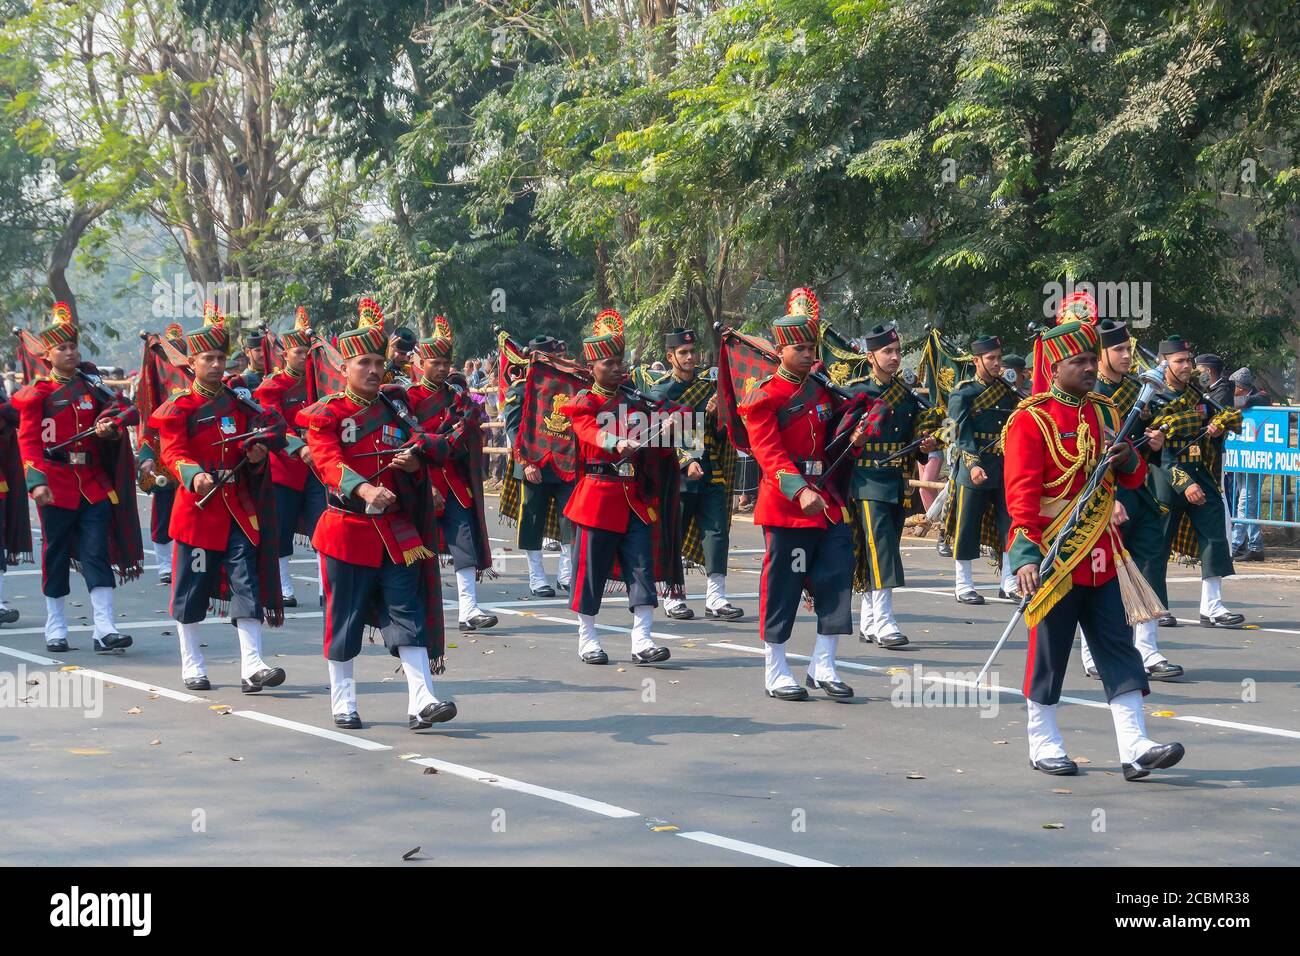 Kolkata, West Bengal, India - 26th January 2020 : Indian Military Officers dressed as musical band, carrying musical instruments are marching past. Stock Photo